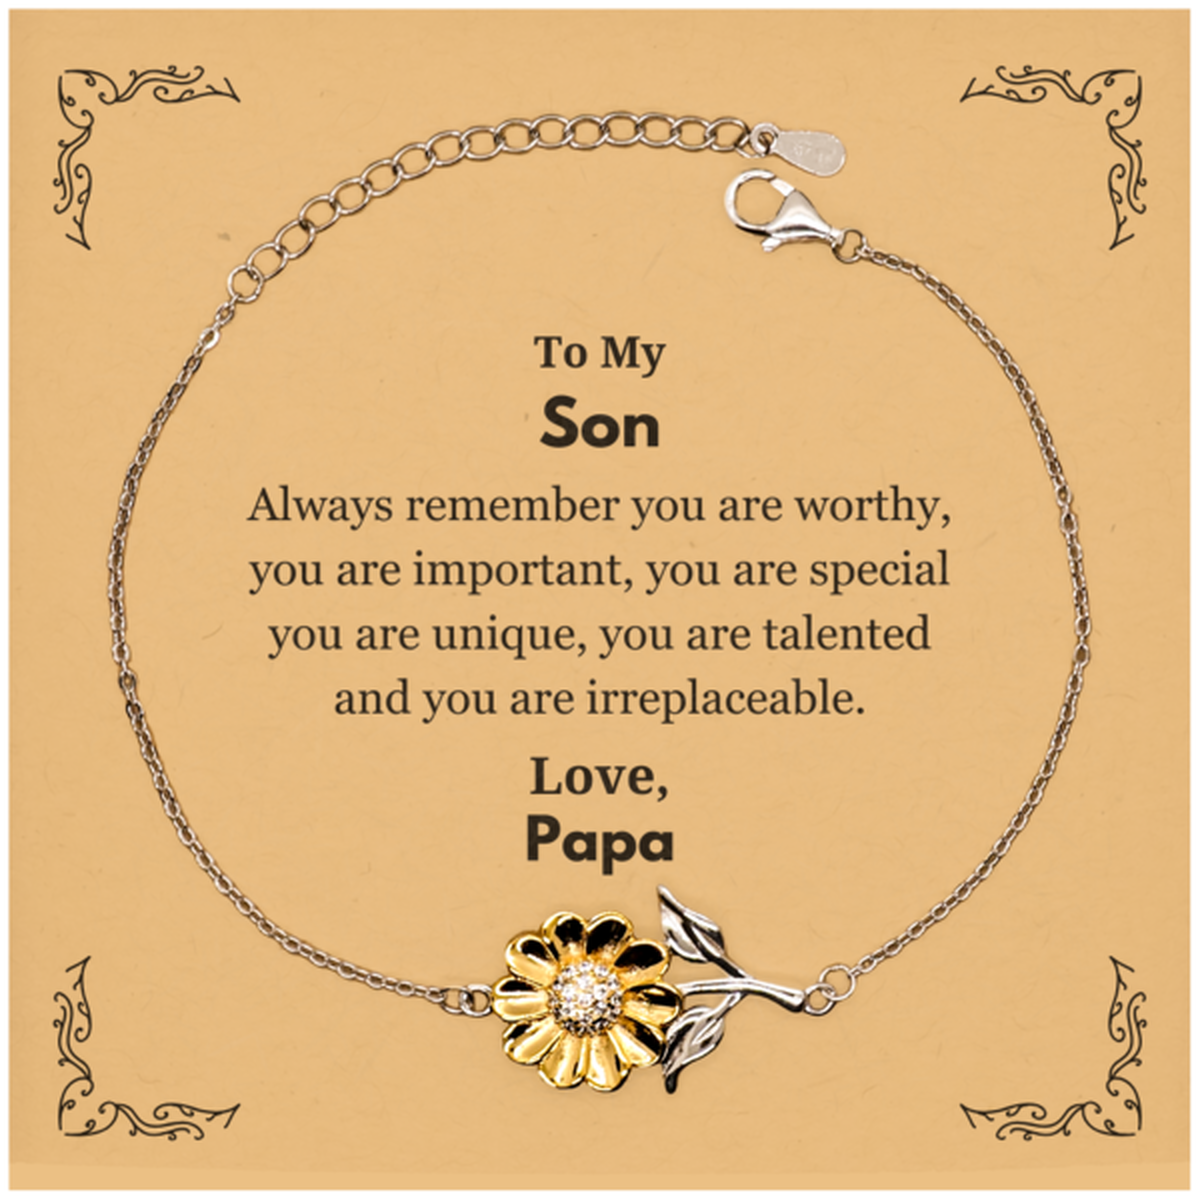 Son Birthday Gifts from Papa, Inspirational Sunflower Bracelet for Son Christmas Graduation Gifts for Son Always remember you are worthy, you are important. Love, Papa